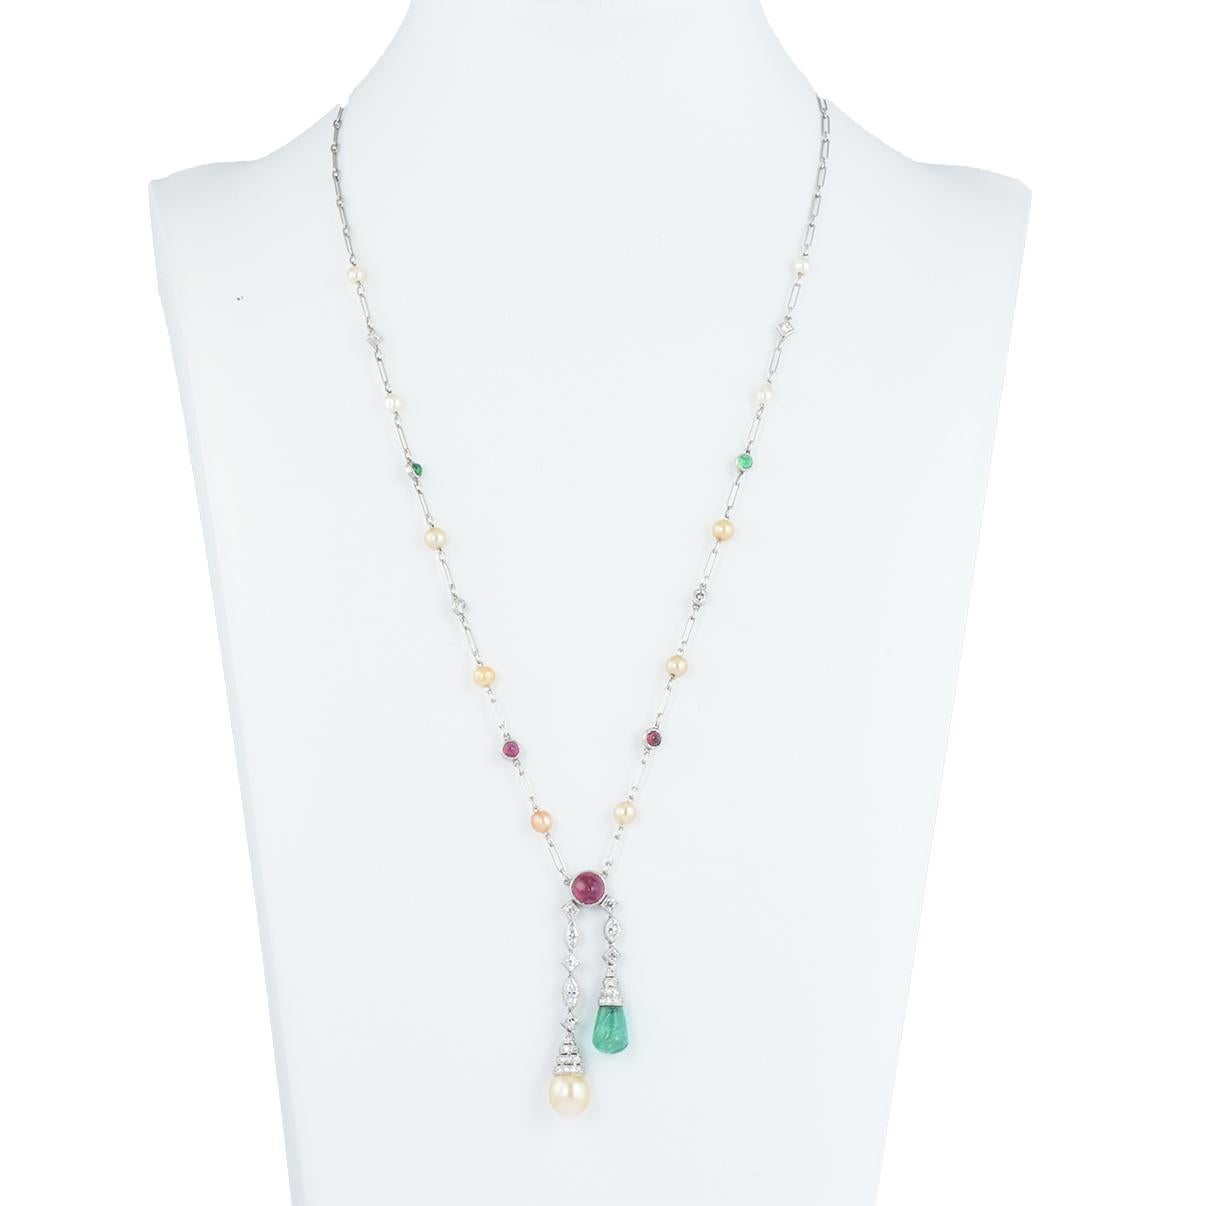 Stunning Art Deco platinum, diamond, pearl and gem set negligee necklace by Tiffany & Co. 

The central cabochon ruby suspends two articulated diamond drops set with a natural 7.8mm pearl and a carved emerald surmounted with diamonds in a tiered